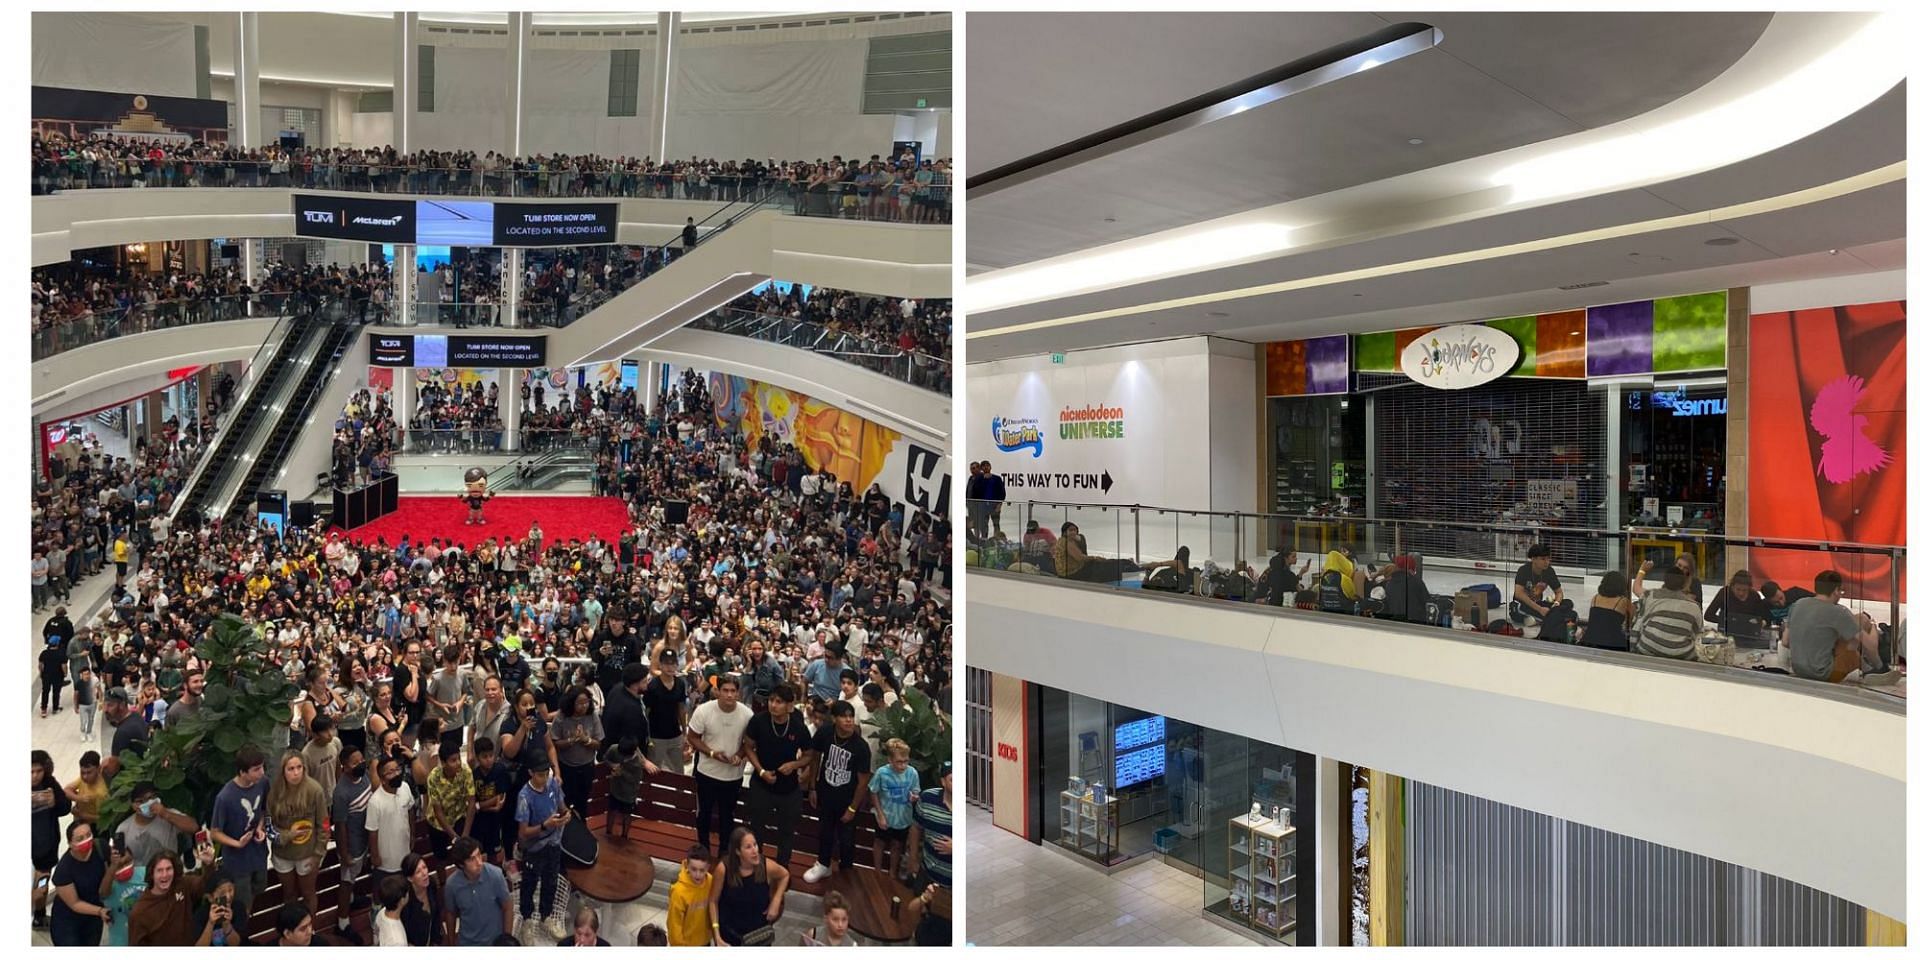 Thousands gather in American Dream Mall, New Jersey for the opening of MrBeast Burgers on Sunday, September 4, 2022. (Image via Twitter)